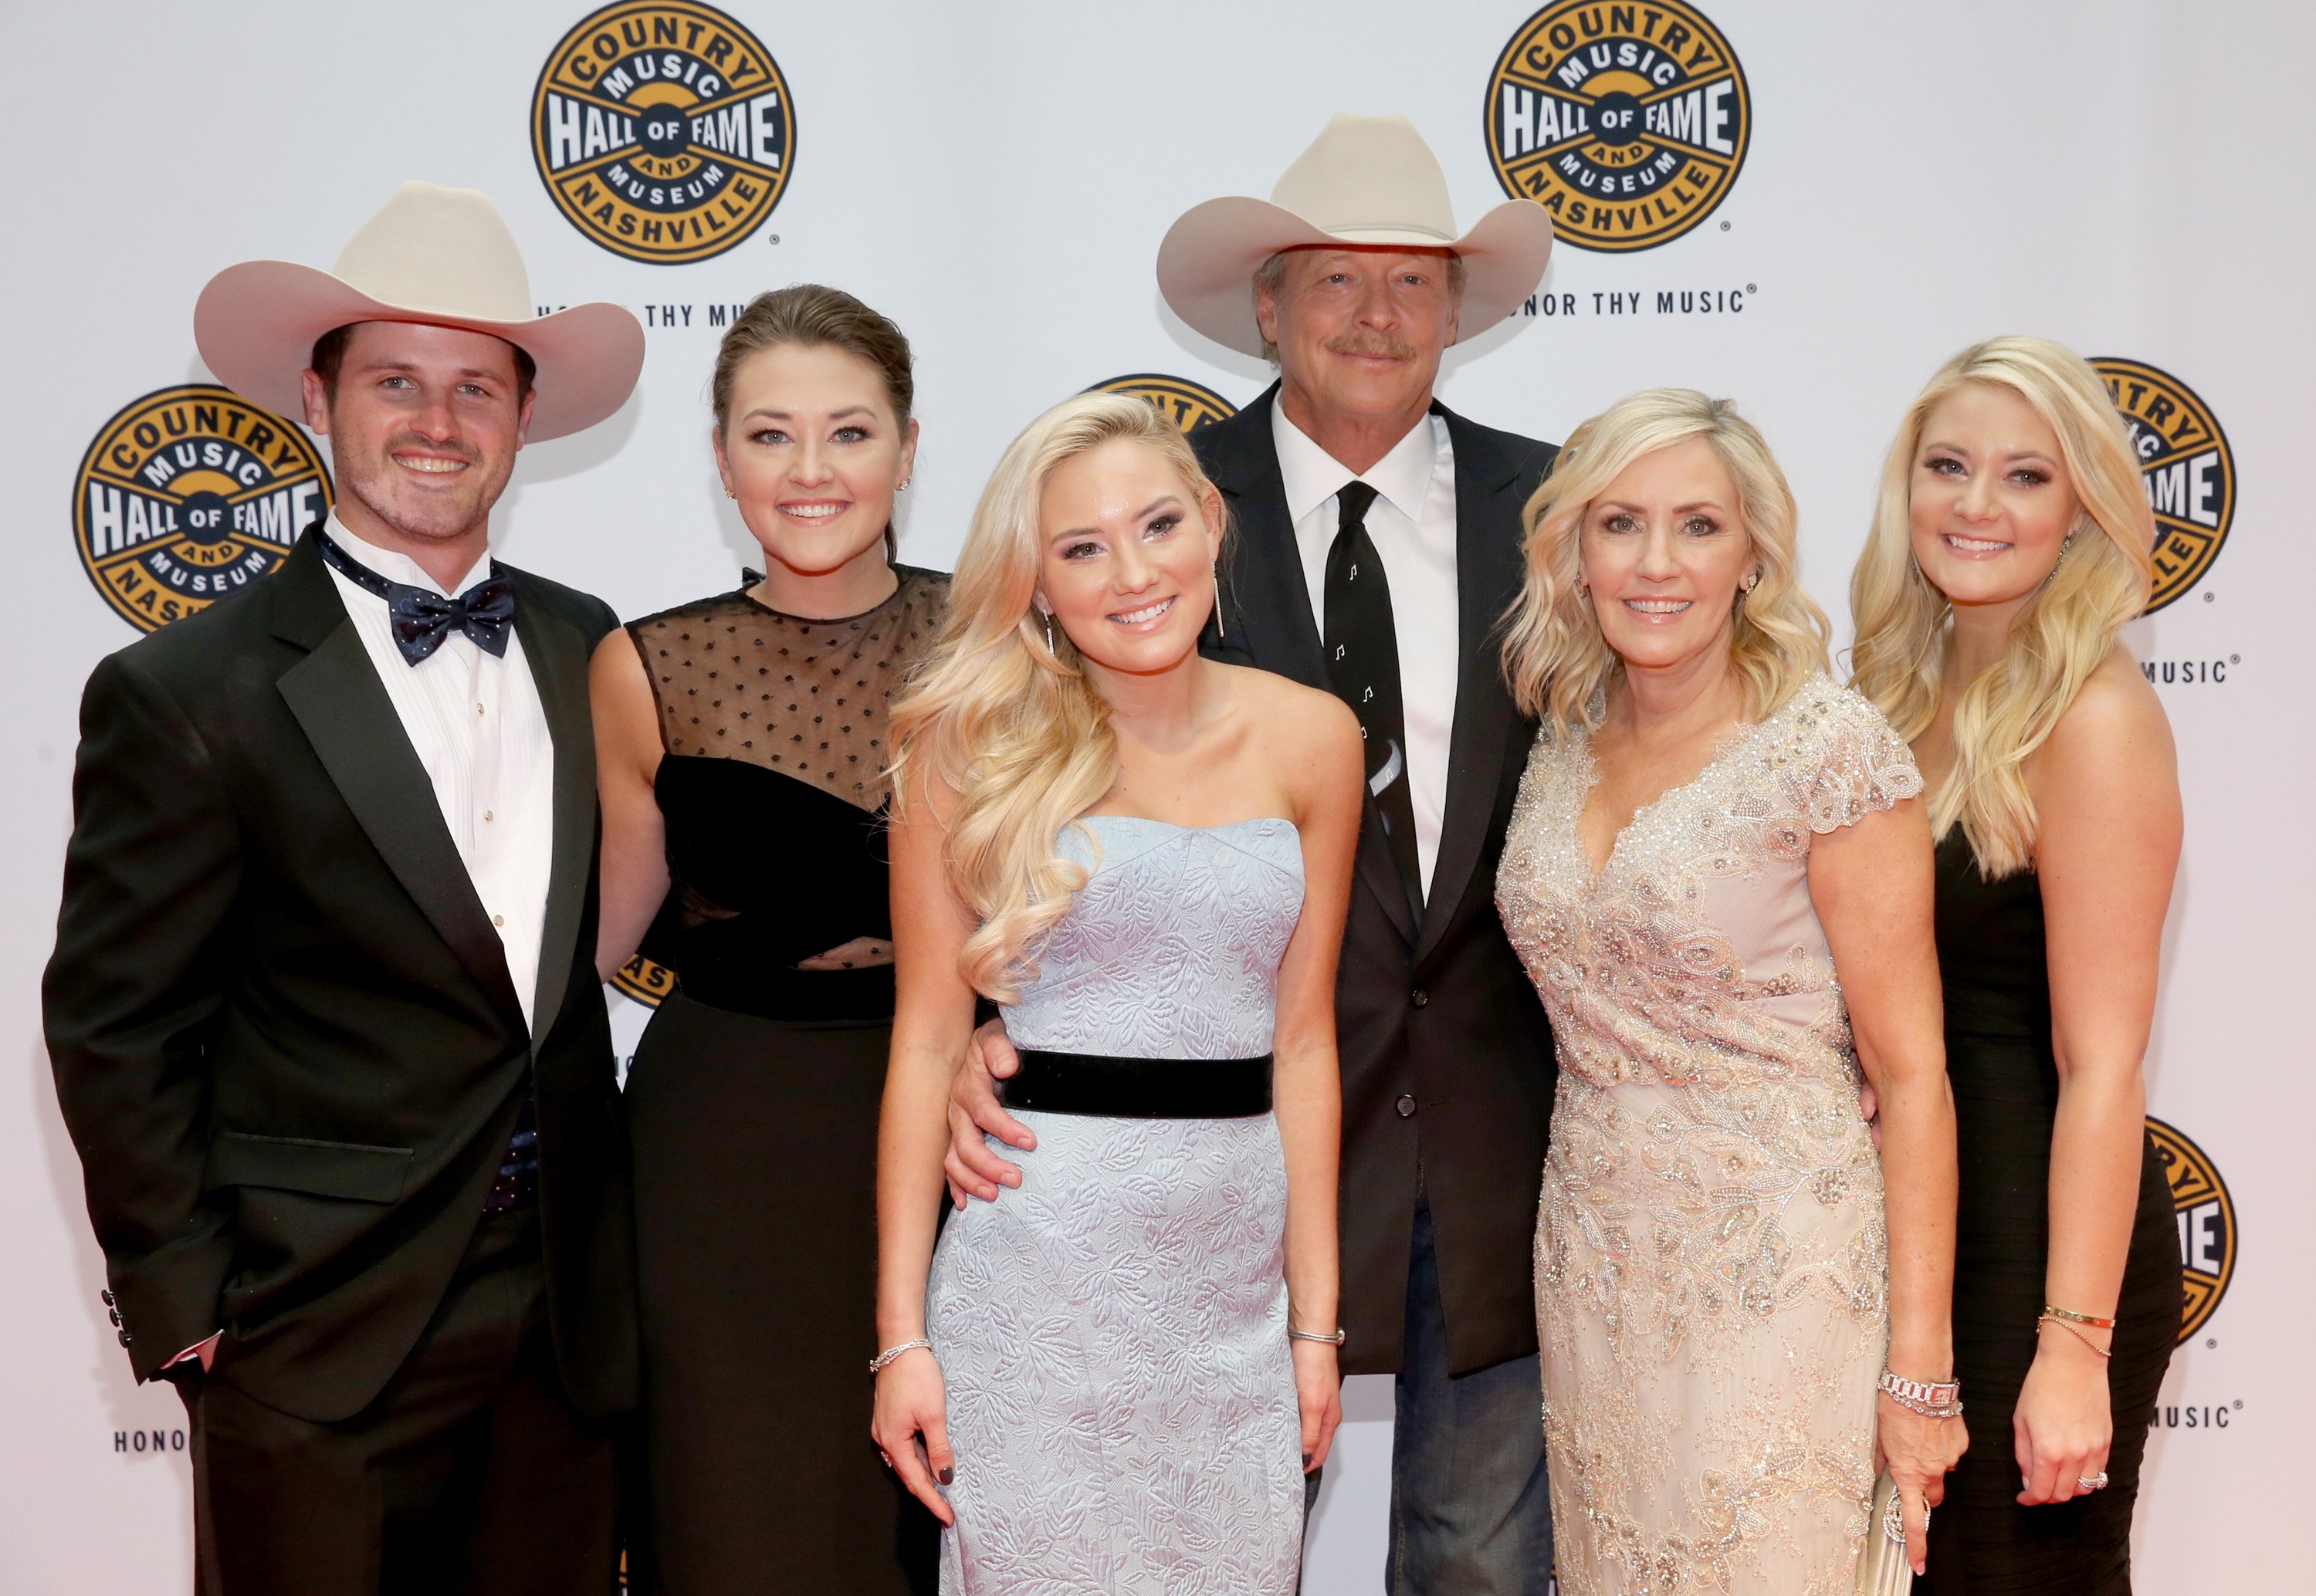 Alan Jackson and family (L-R) Ben Selecman, Mattie Jackson, Dani Jackson, Denise Jackson, and Alexandra Jackson, at the Country Music Hall of Fame and Museum on October 22, 2017, in Nashville, Tennessee. | Source: Getty Images